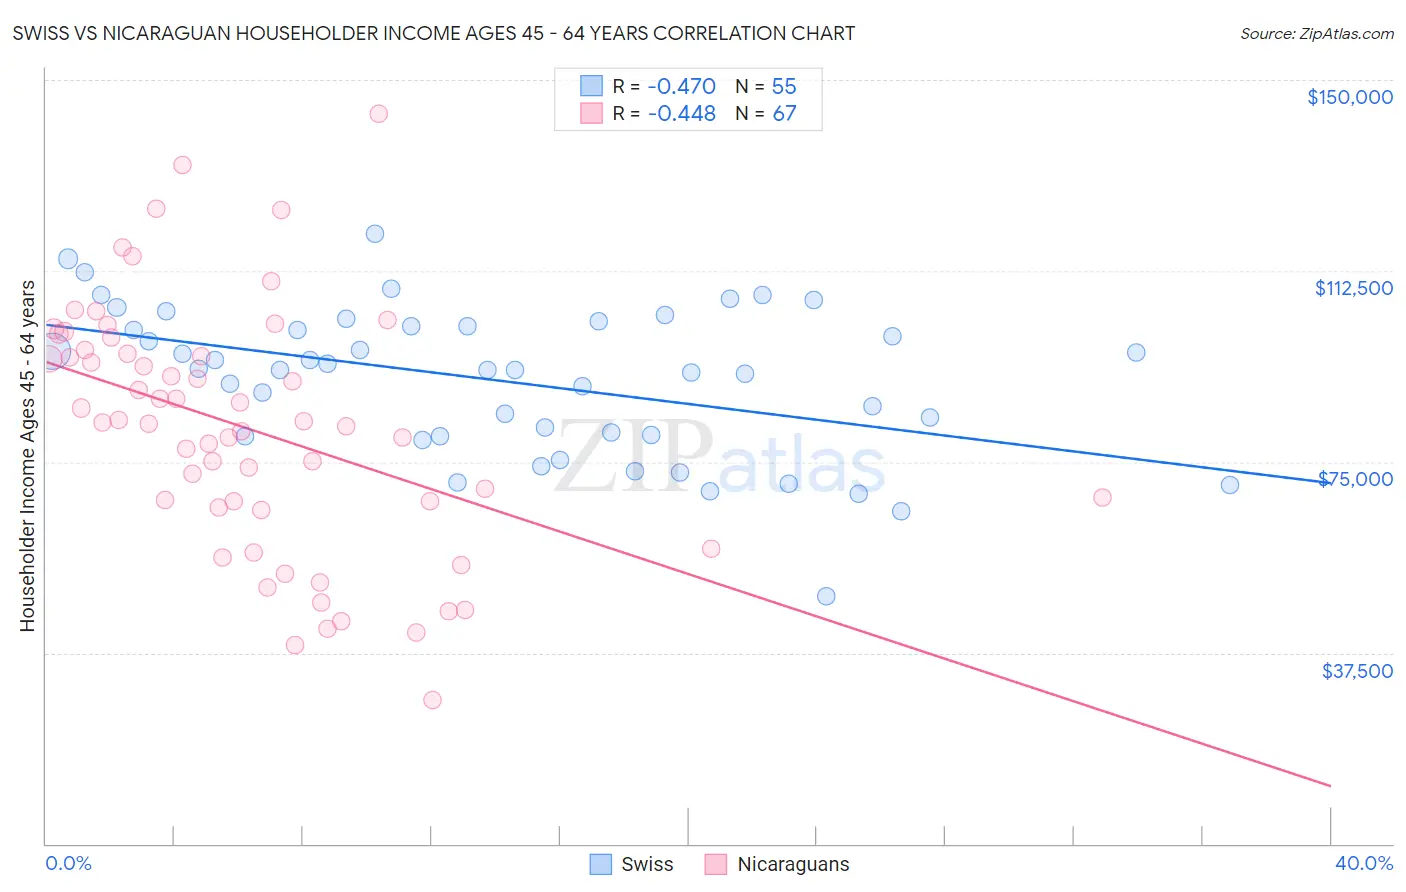 Swiss vs Nicaraguan Householder Income Ages 45 - 64 years